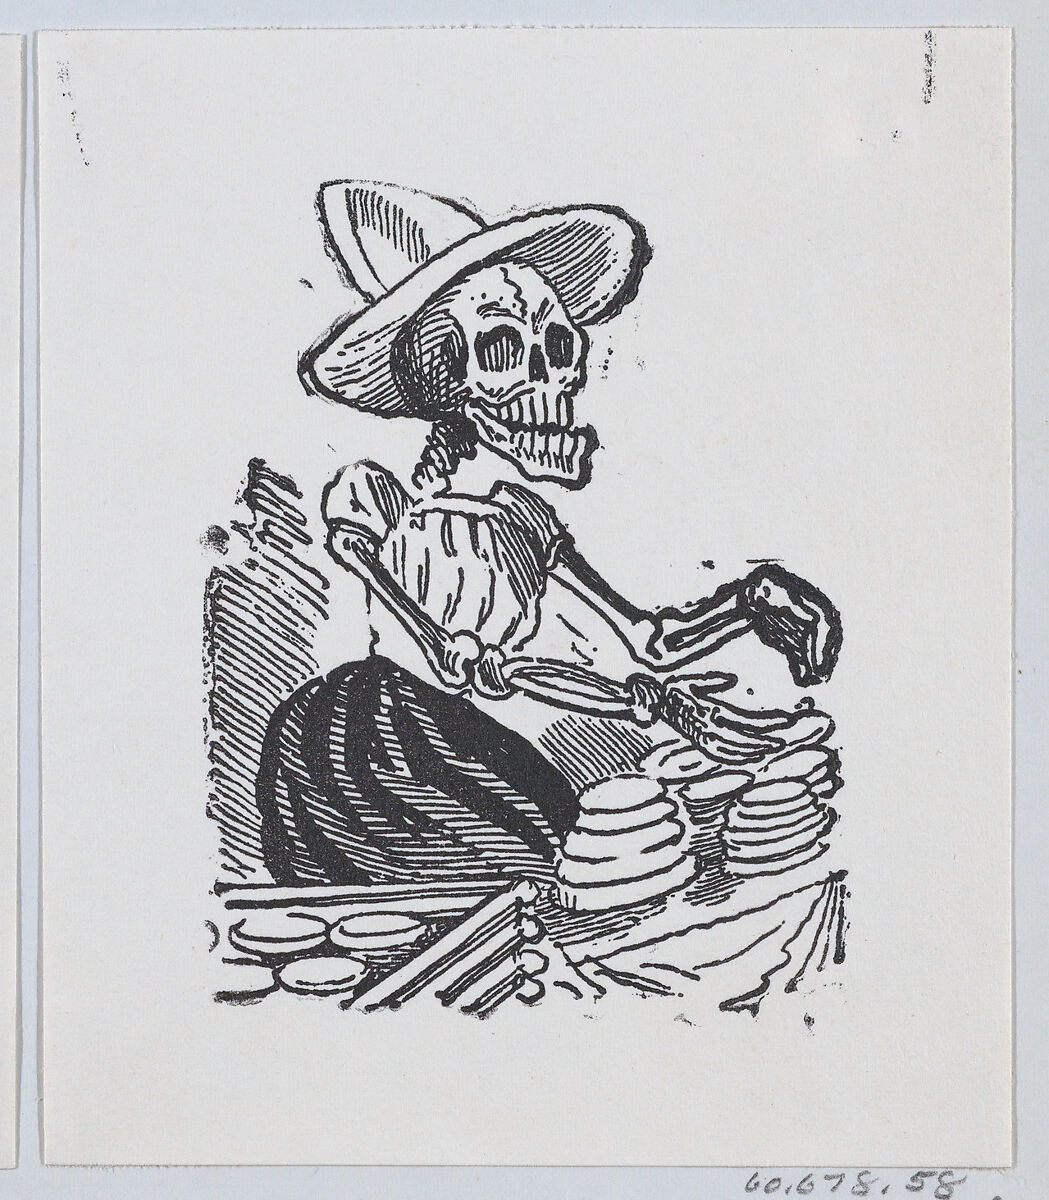 A skeleton selling cheese from a broadside entitled 'Una Calavera Chusca', José Guadalupe Posada (Mexican, Aguascalientes 1852–1913 Mexico City), Zincograph 